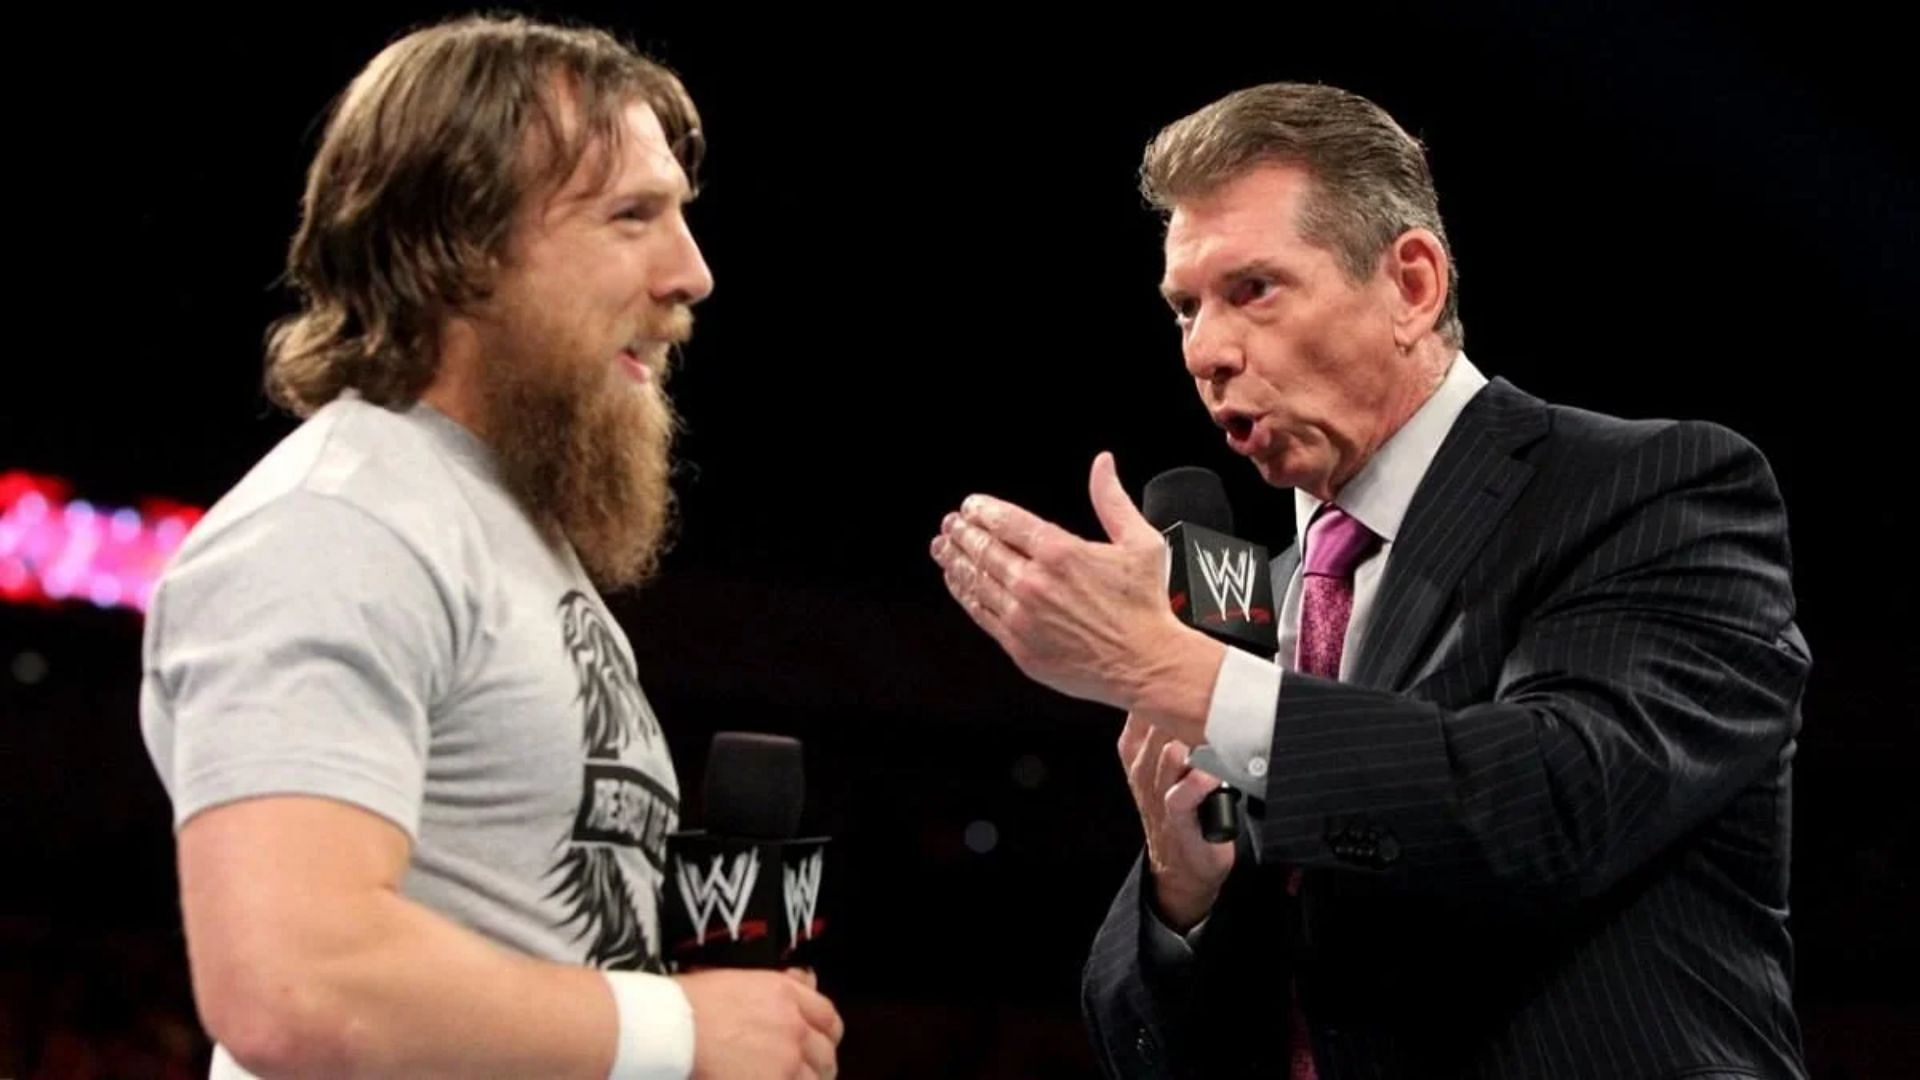 Bryan Danielson (Left) and Vince McMahon (Right) during an on-screen feud in WWE.